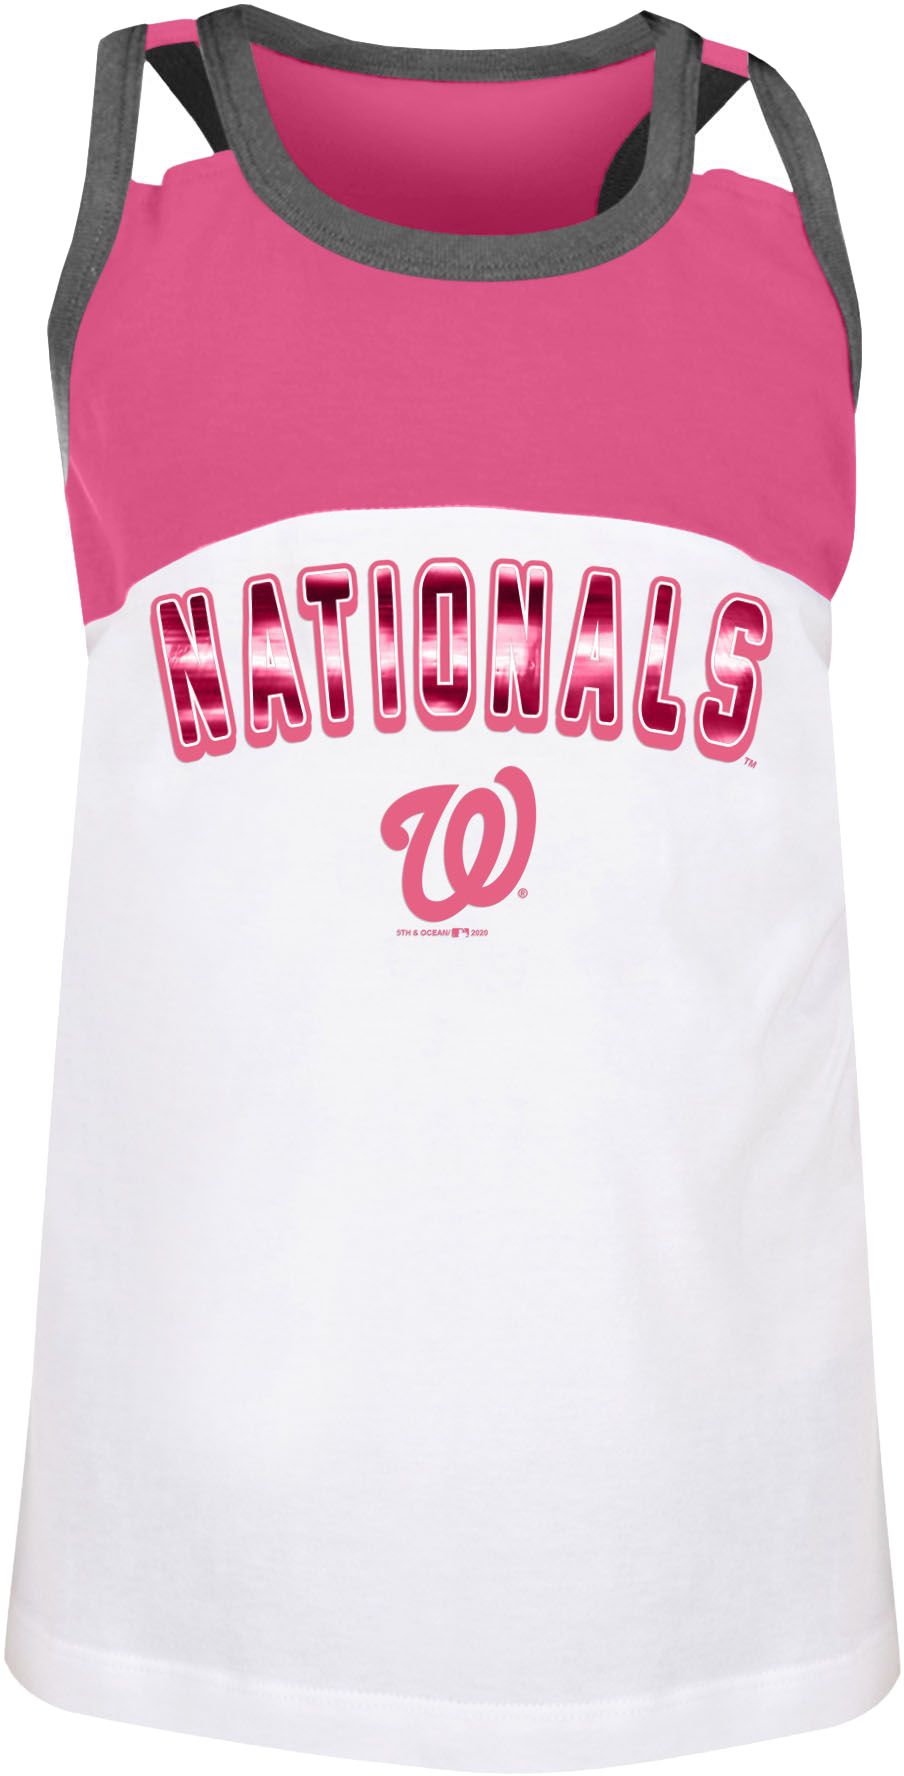 nationals jersey youth